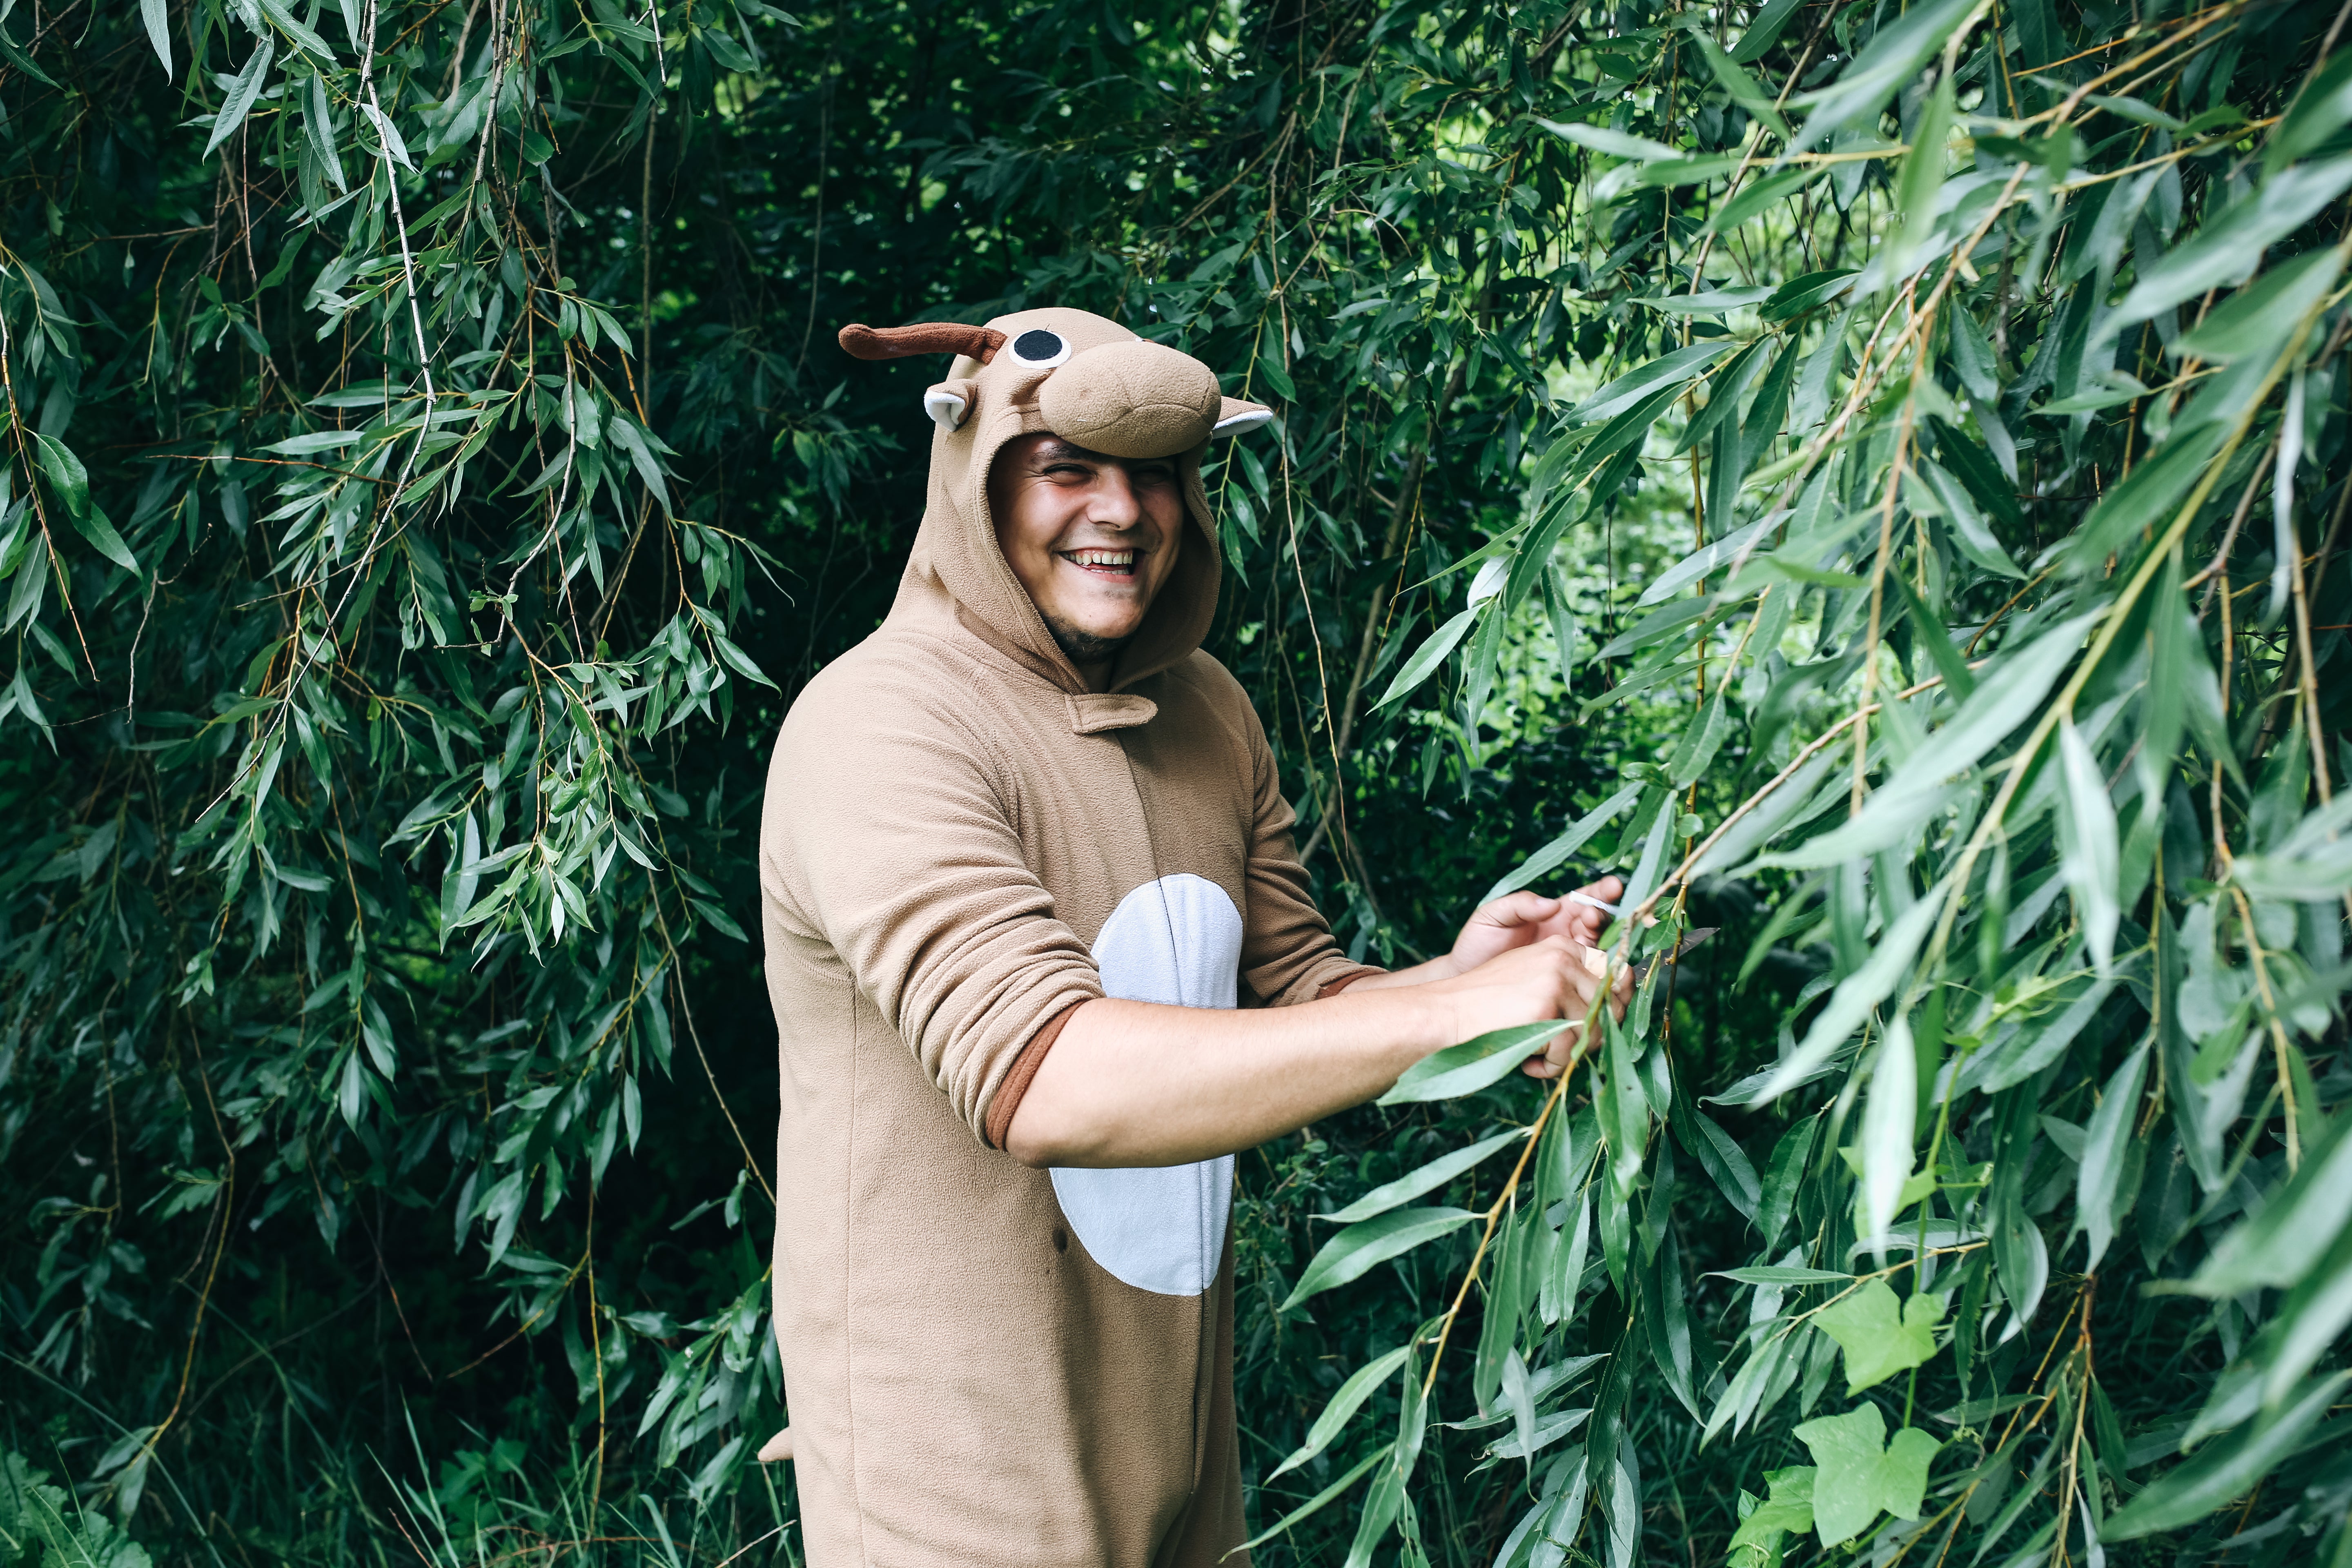 Guy in a deer costume in the forest.